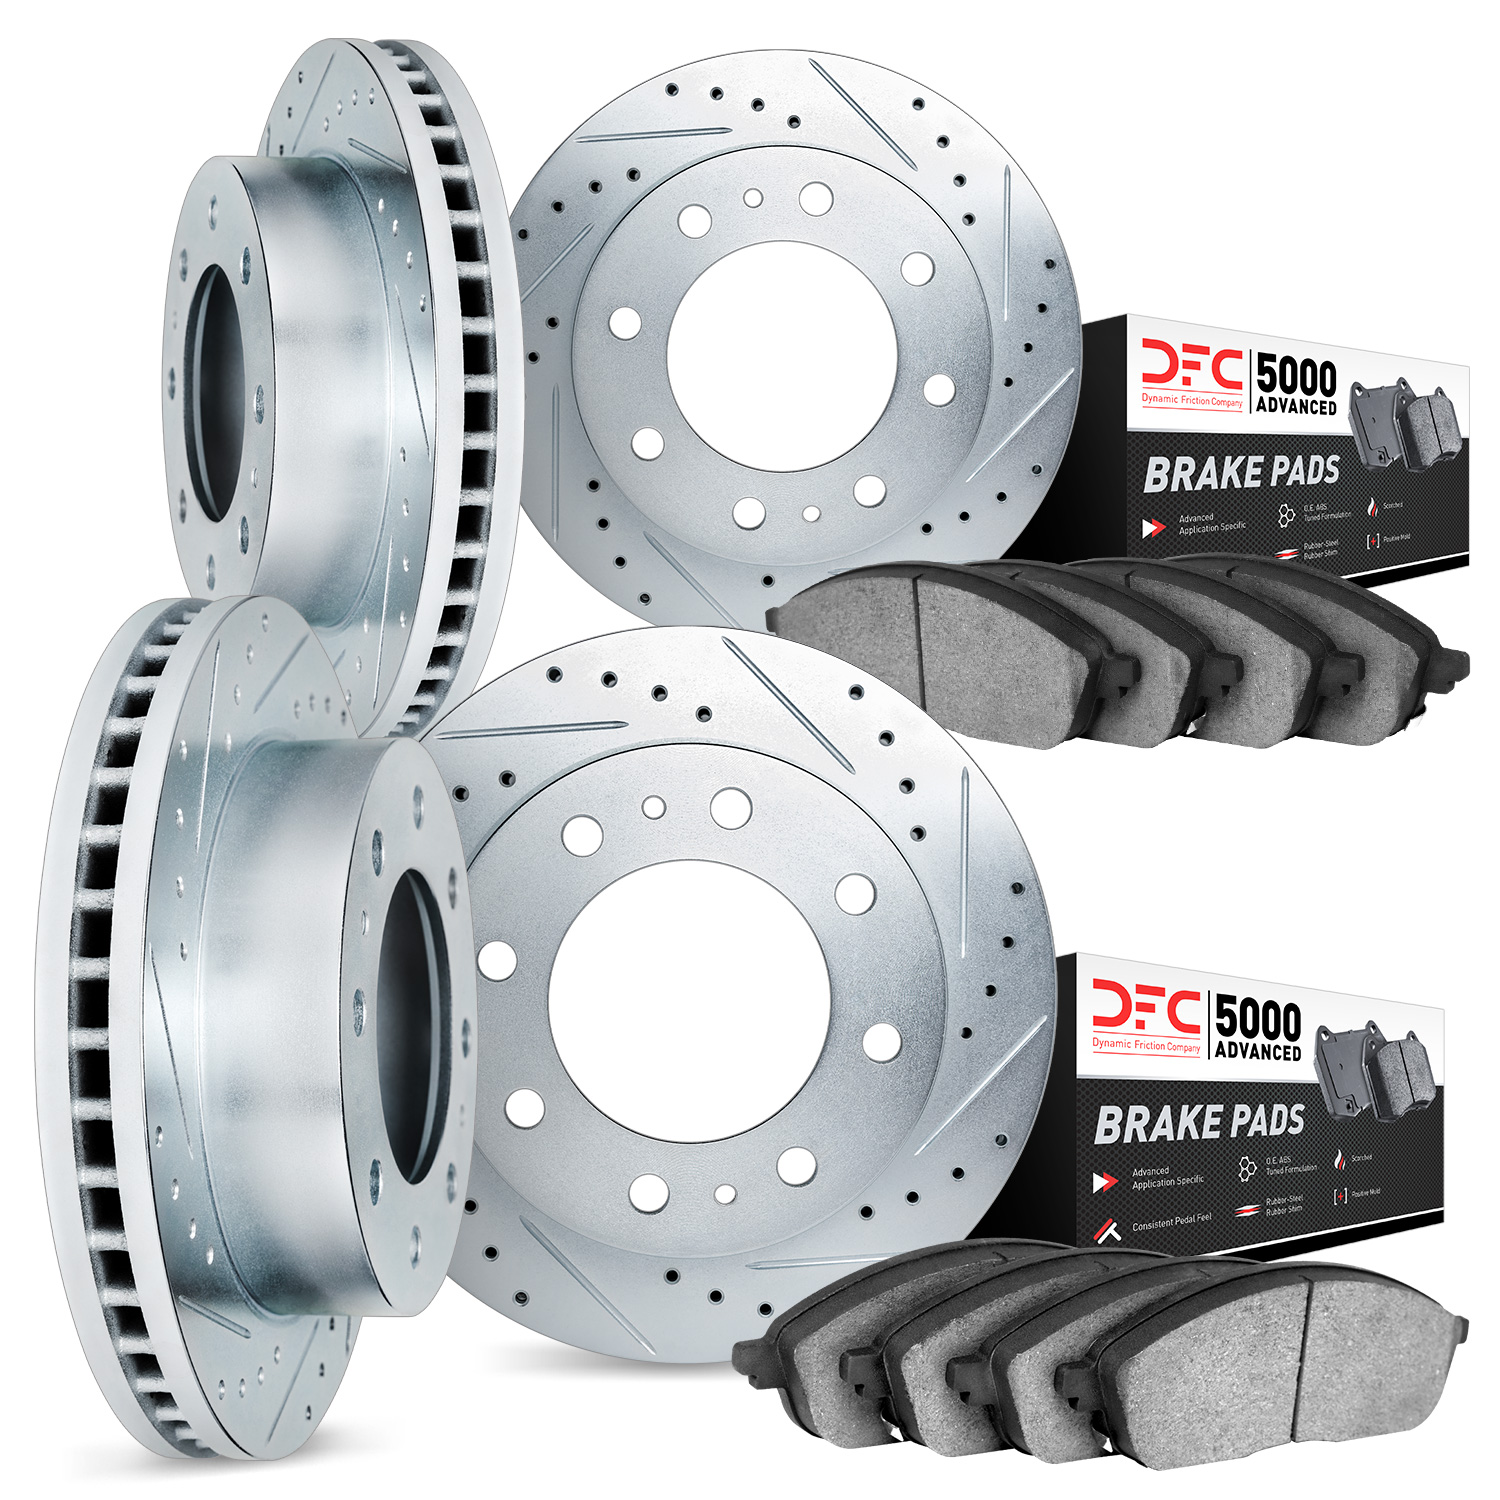 7504-40236 Drilled/Slotted Brake Rotors w/5000 Advanced Brake Pads Kit [Silver], 2000-2002 Mopar, Position: Front and Rear